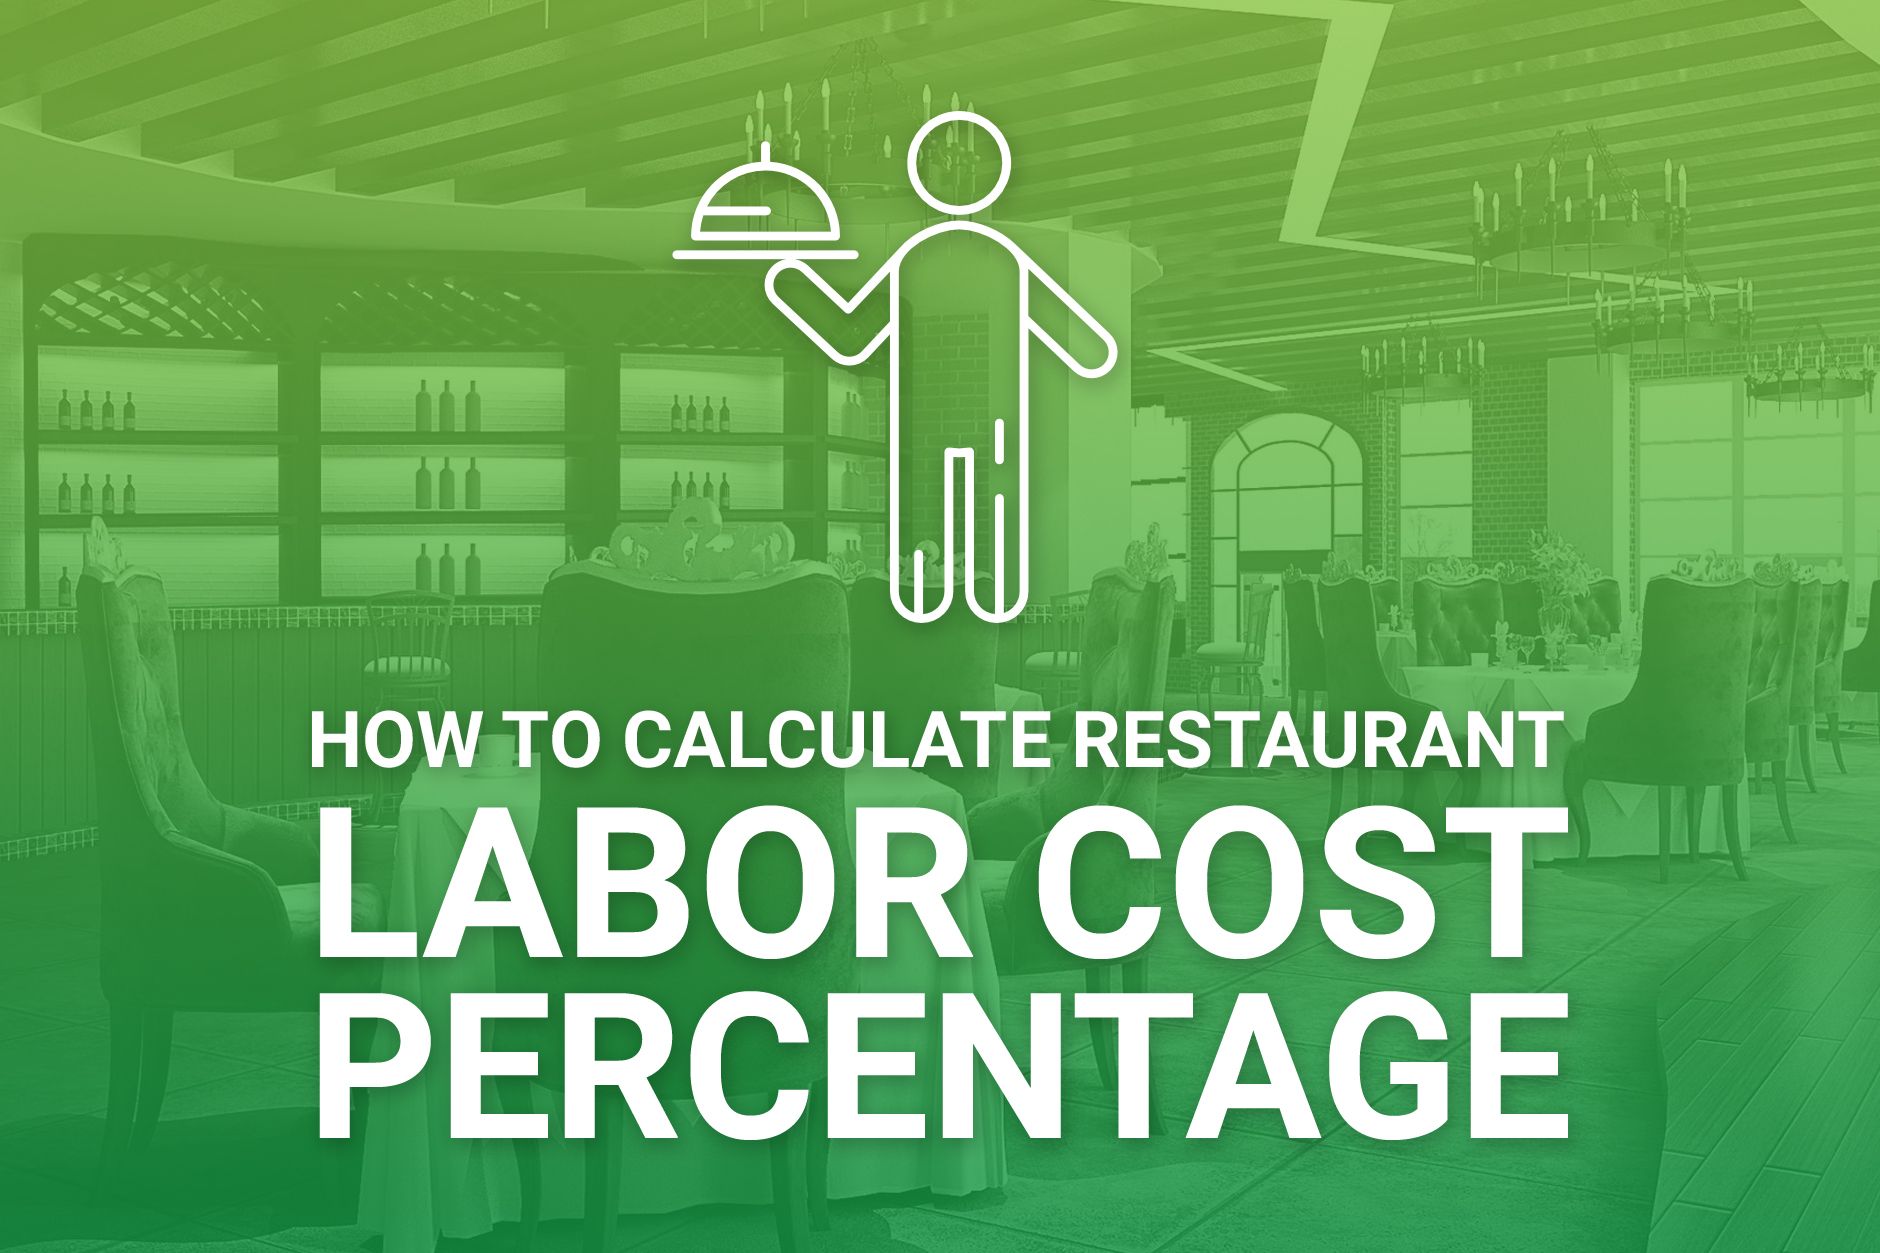 How To Calculate Restaurant Labor Cost Percentage